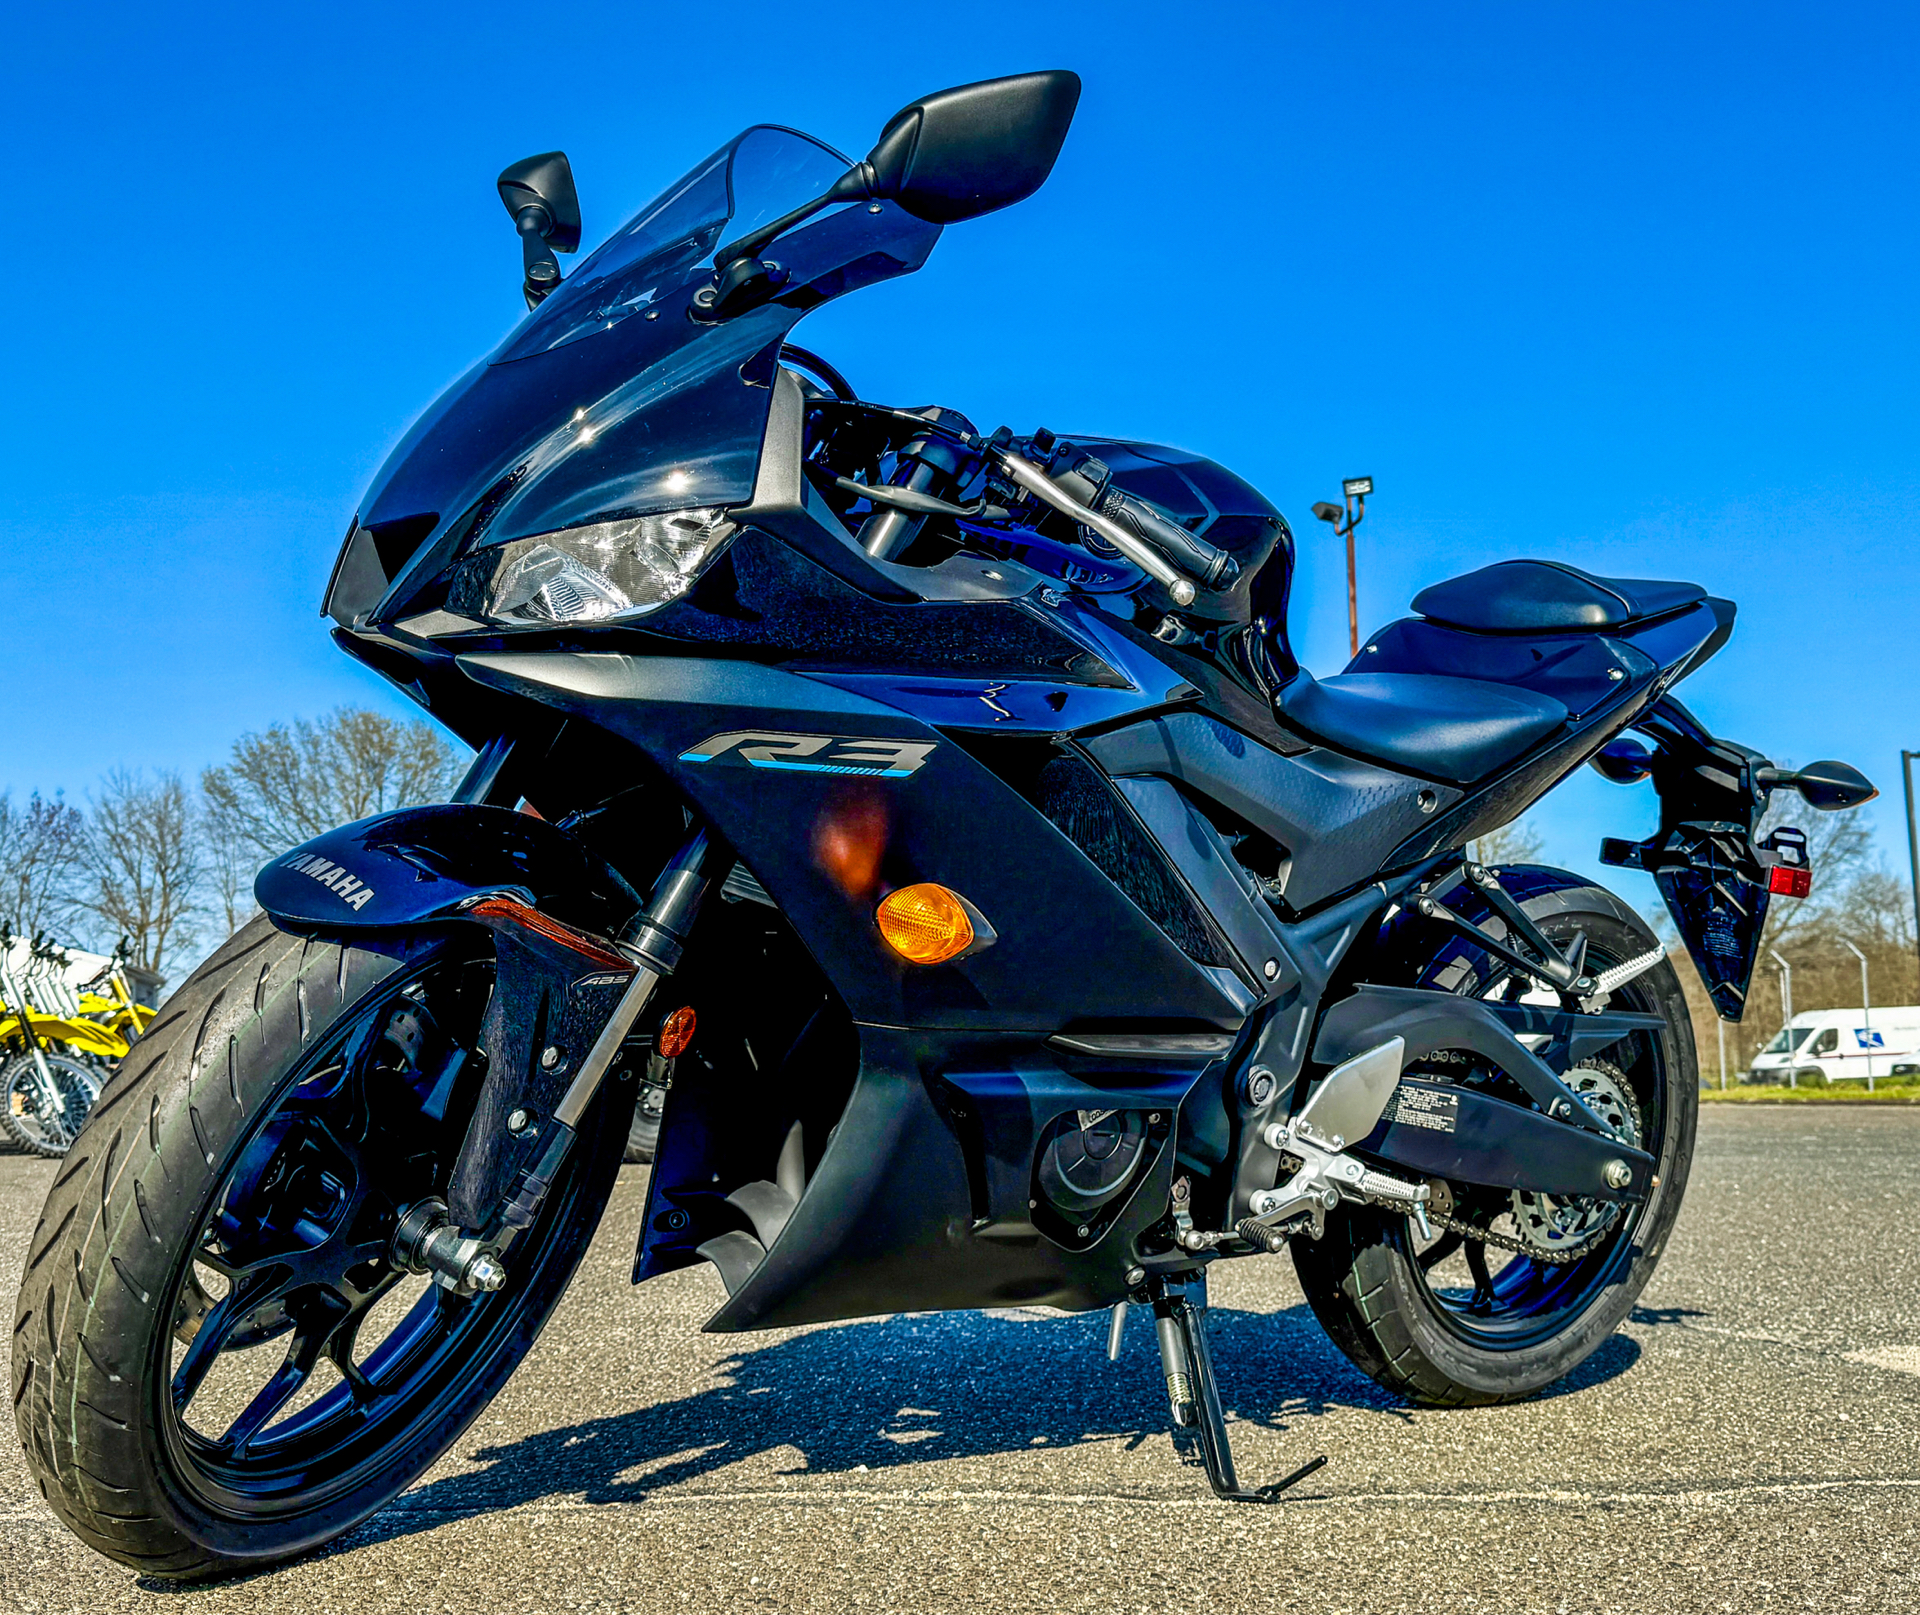 2023 Yamaha YZF-R3 ABS in Enfield, Connecticut - Photo 8